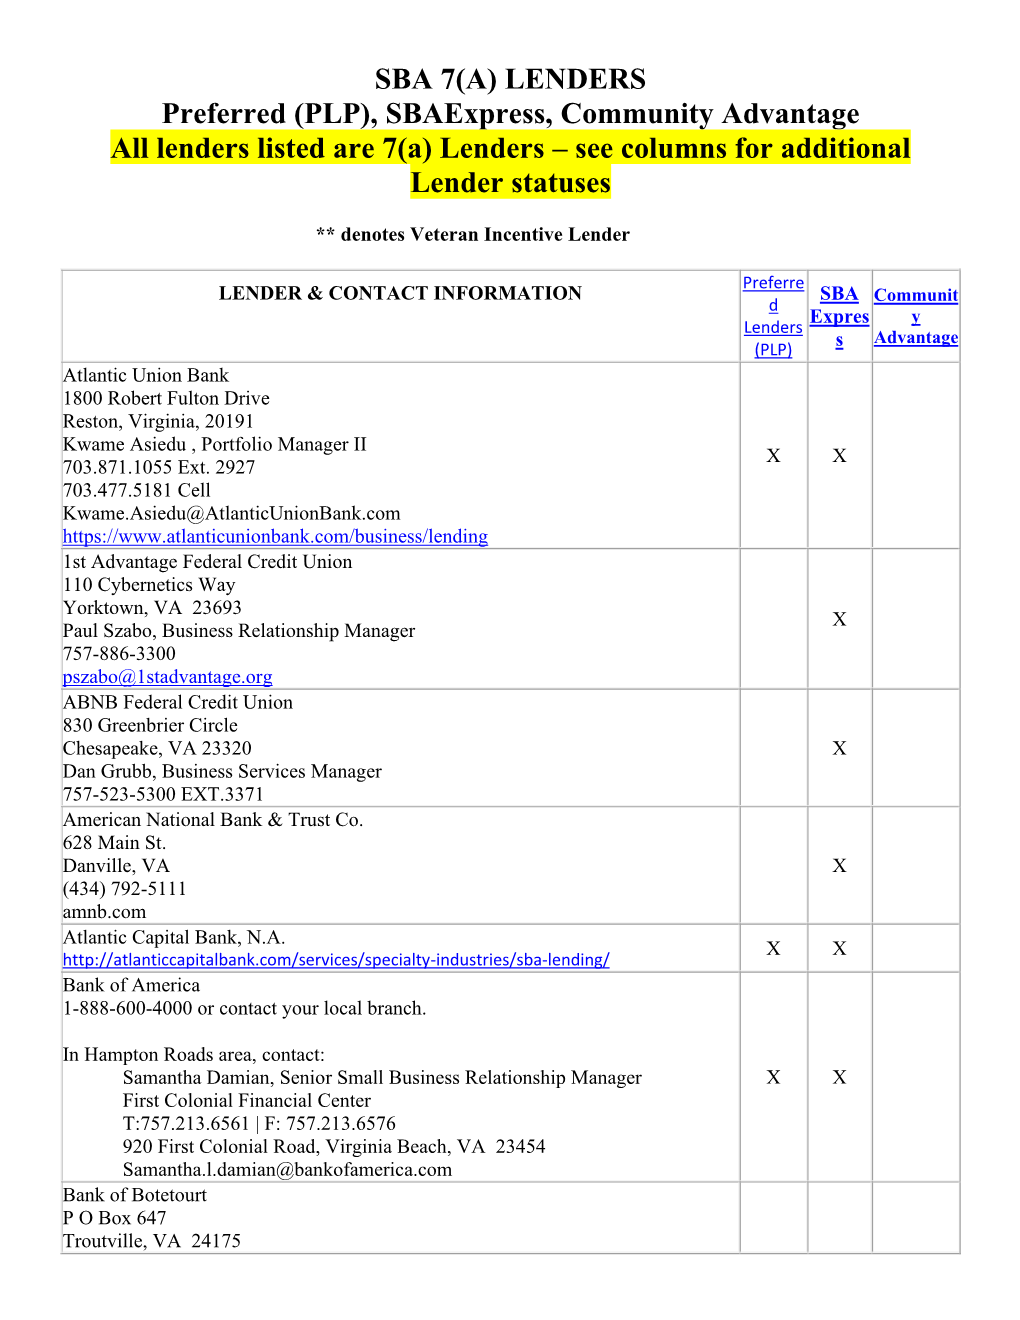 (PLP), Sbaexpress, Community Advantage All Lenders Listed Are 7(A) Lenders – See Columns for Additional Lender Statuses